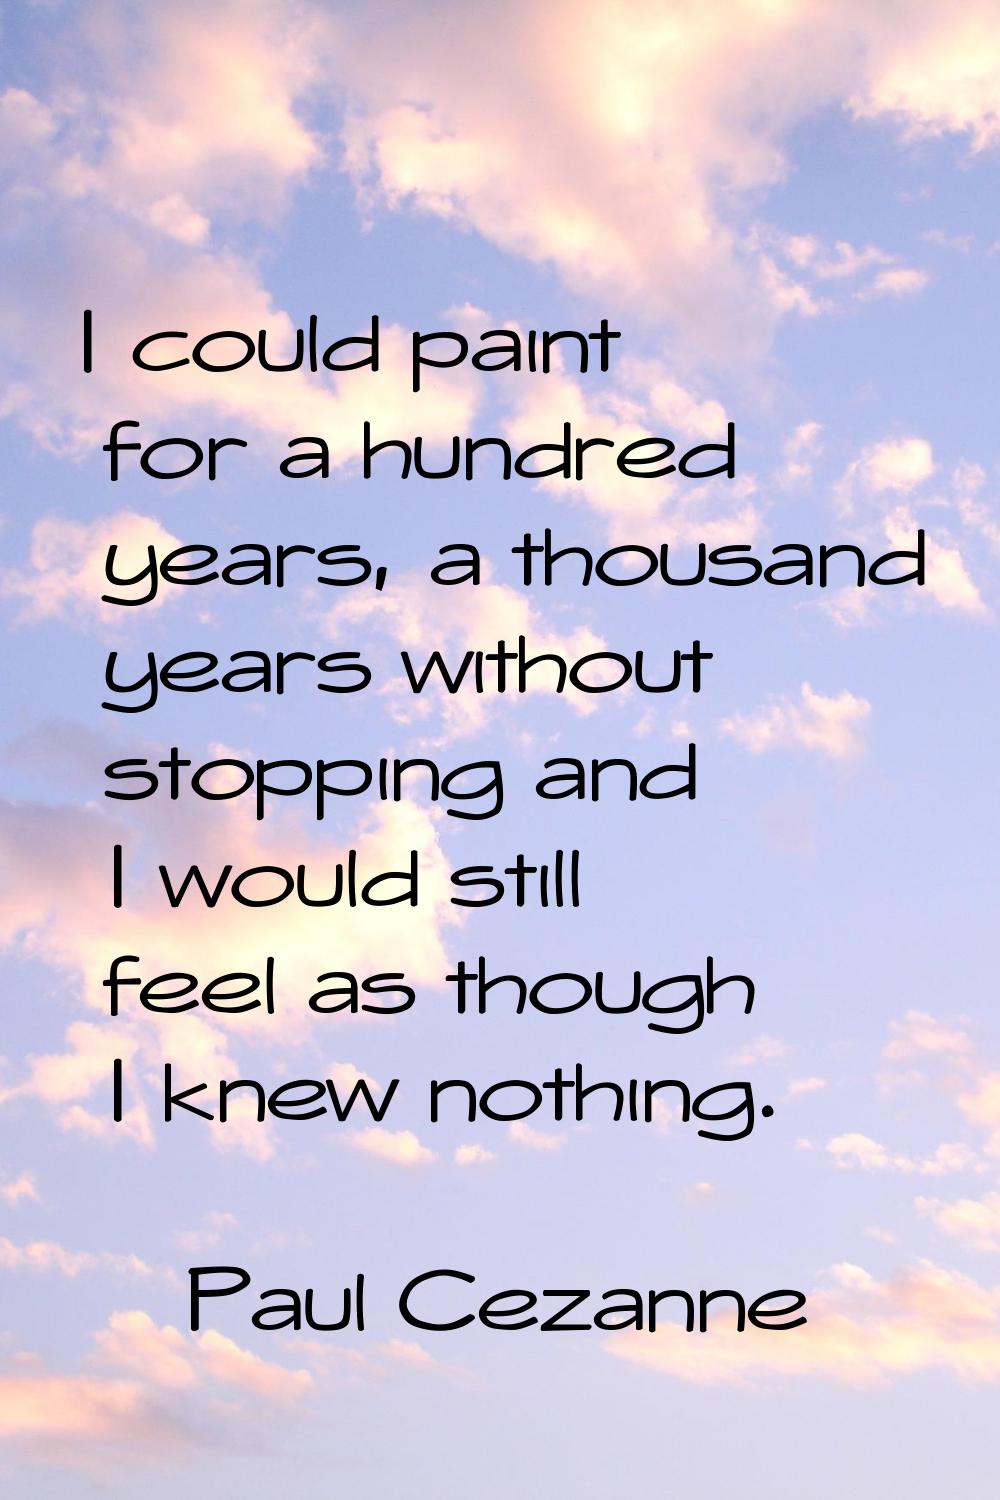 I could paint for a hundred years, a thousand years without stopping and I would still feel as thou